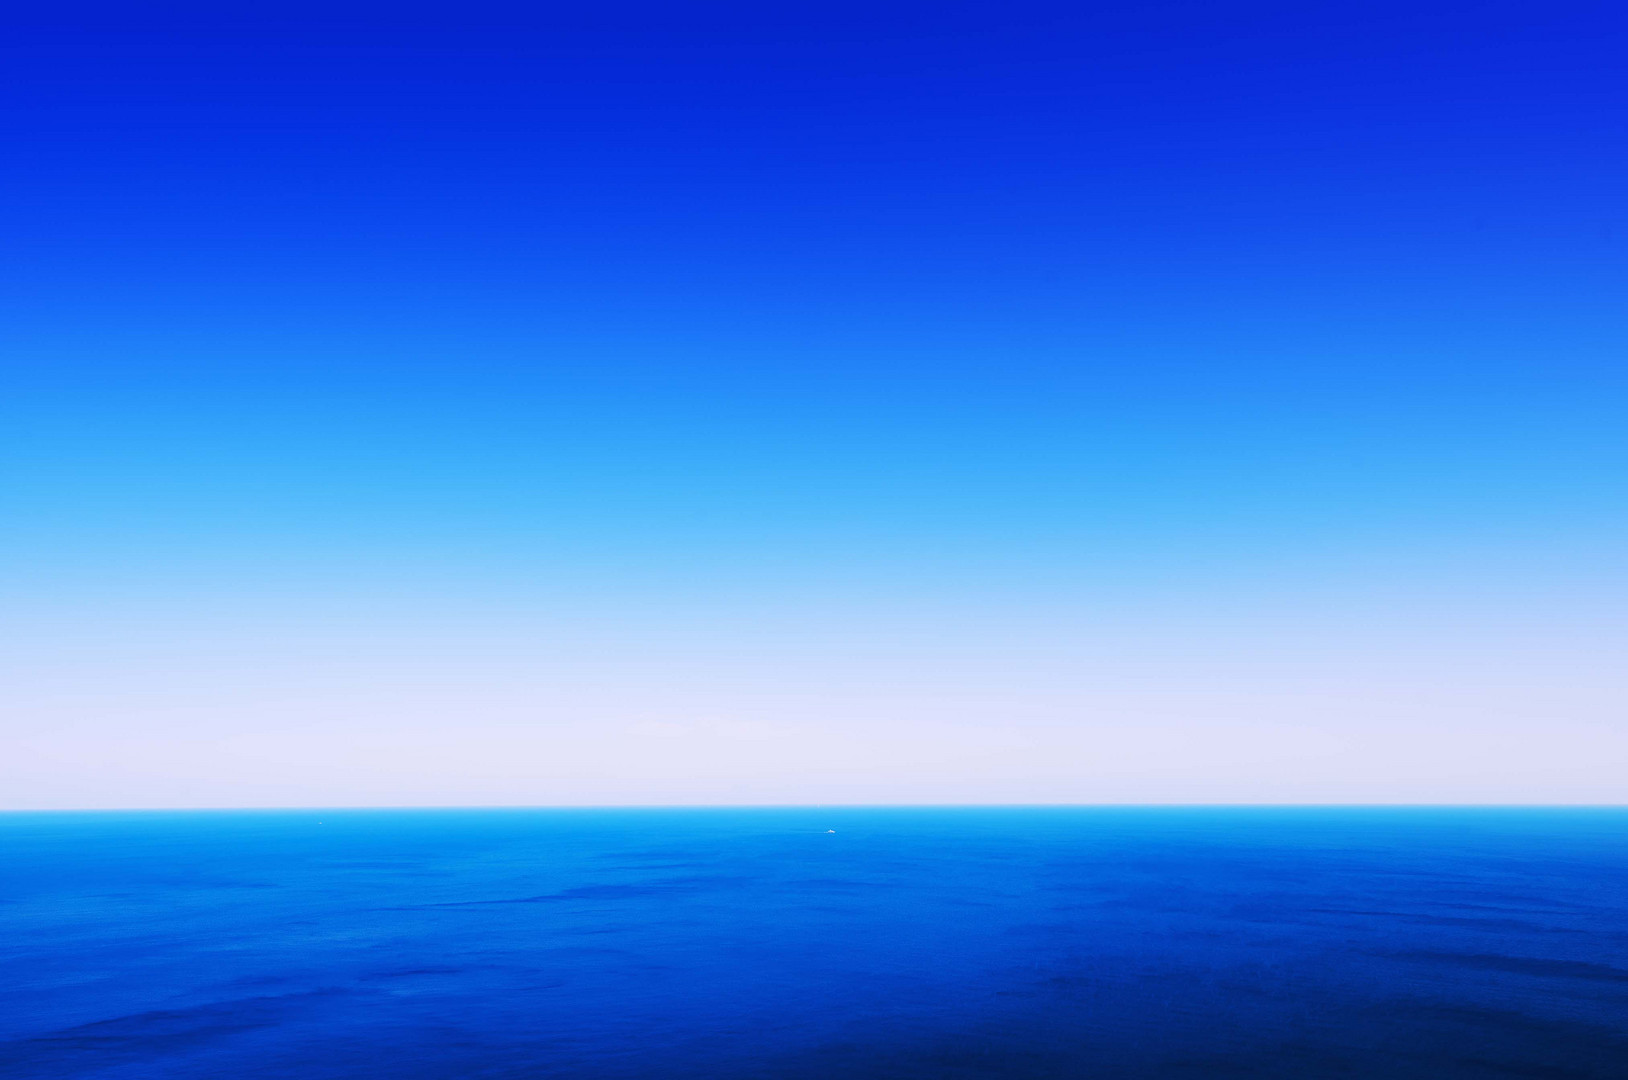 Into the blue